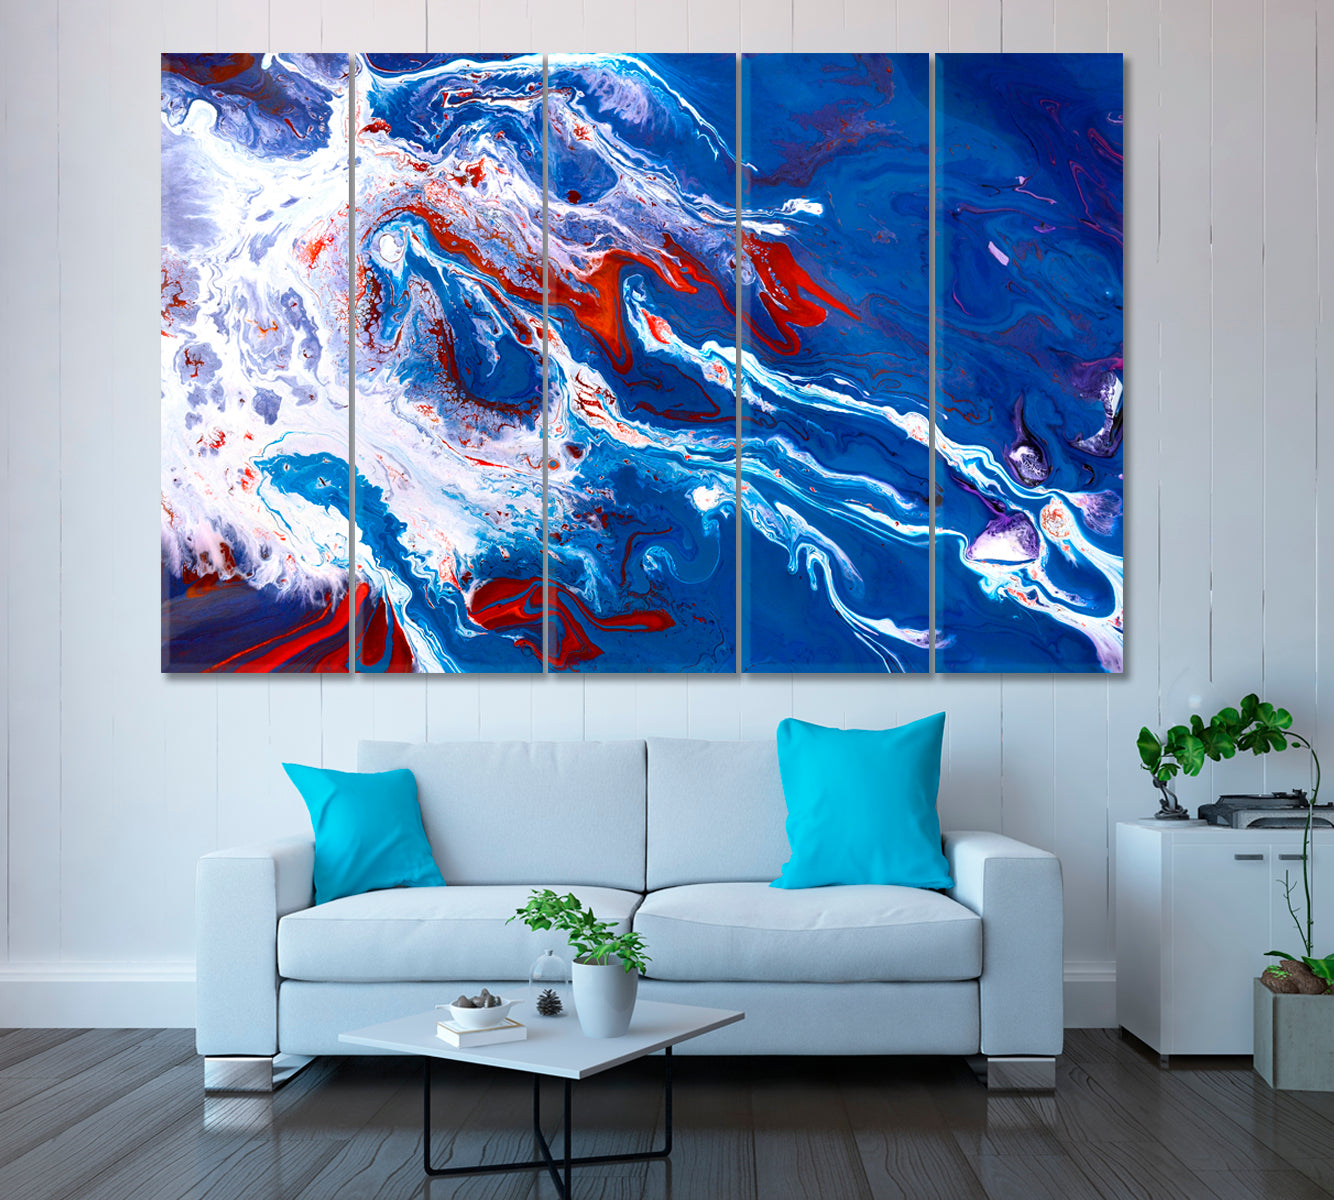 Blue Mixed Flowing Ink Canvas Print ArtLexy 5 Panels 36"x24" inches 